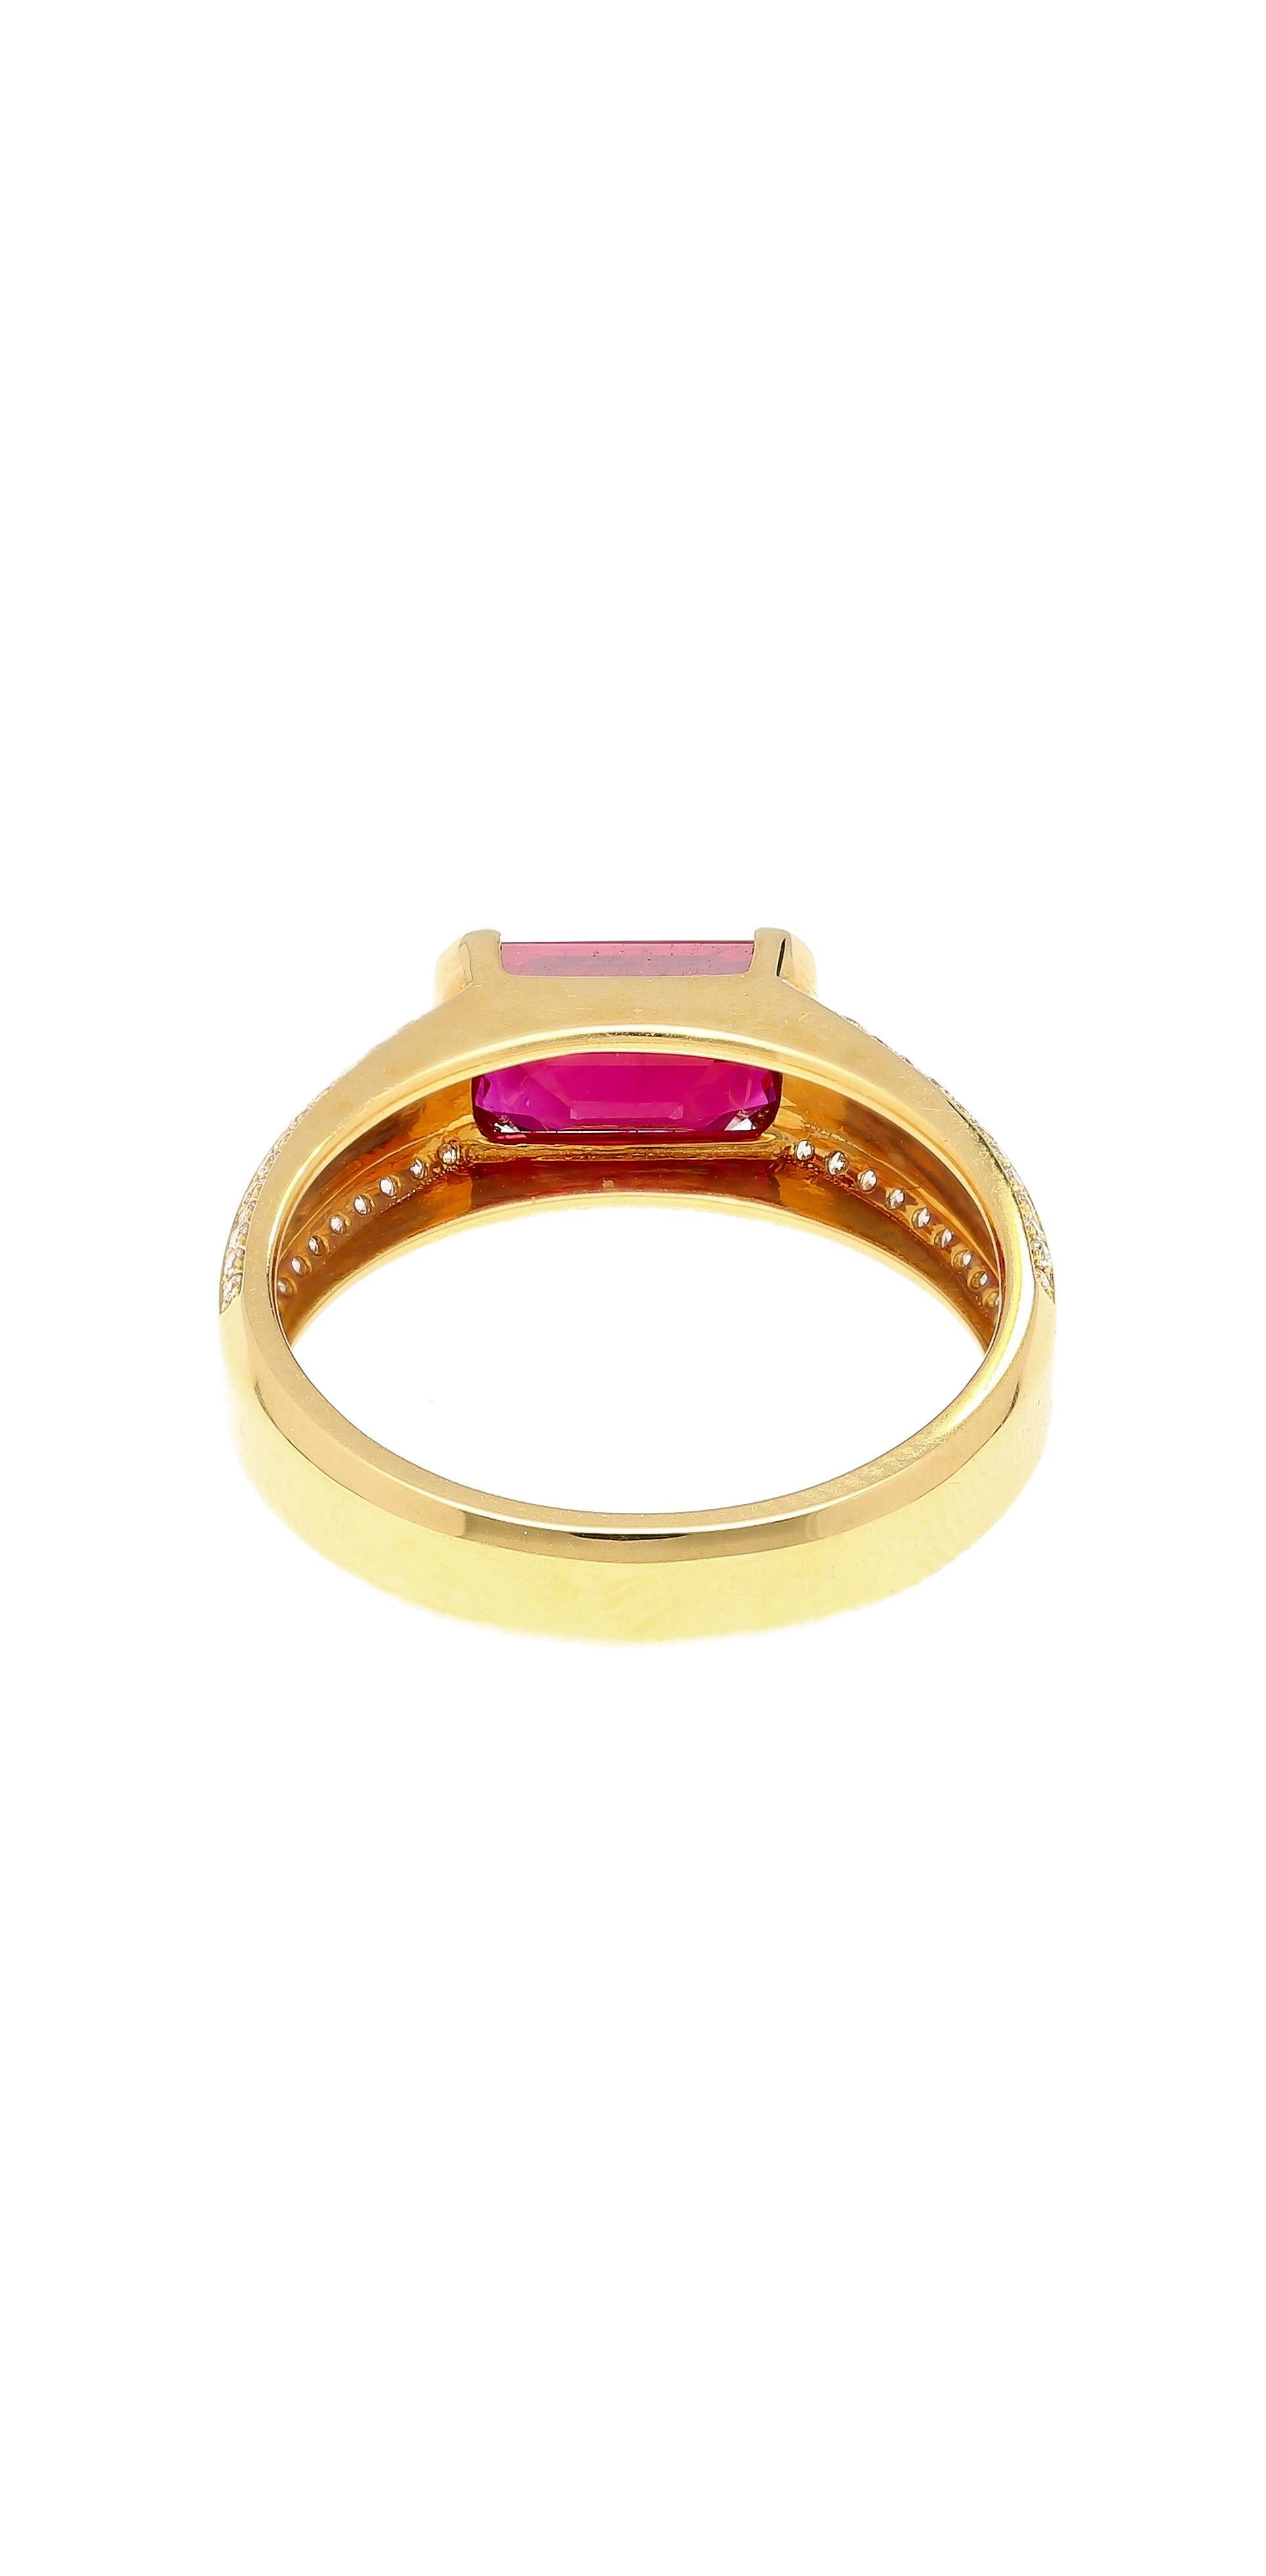 Women's or Men's 2.09 Carat Vivid Red Pigeon's Blood Burma Ruby Emerald Cut East-West Ring For Sale